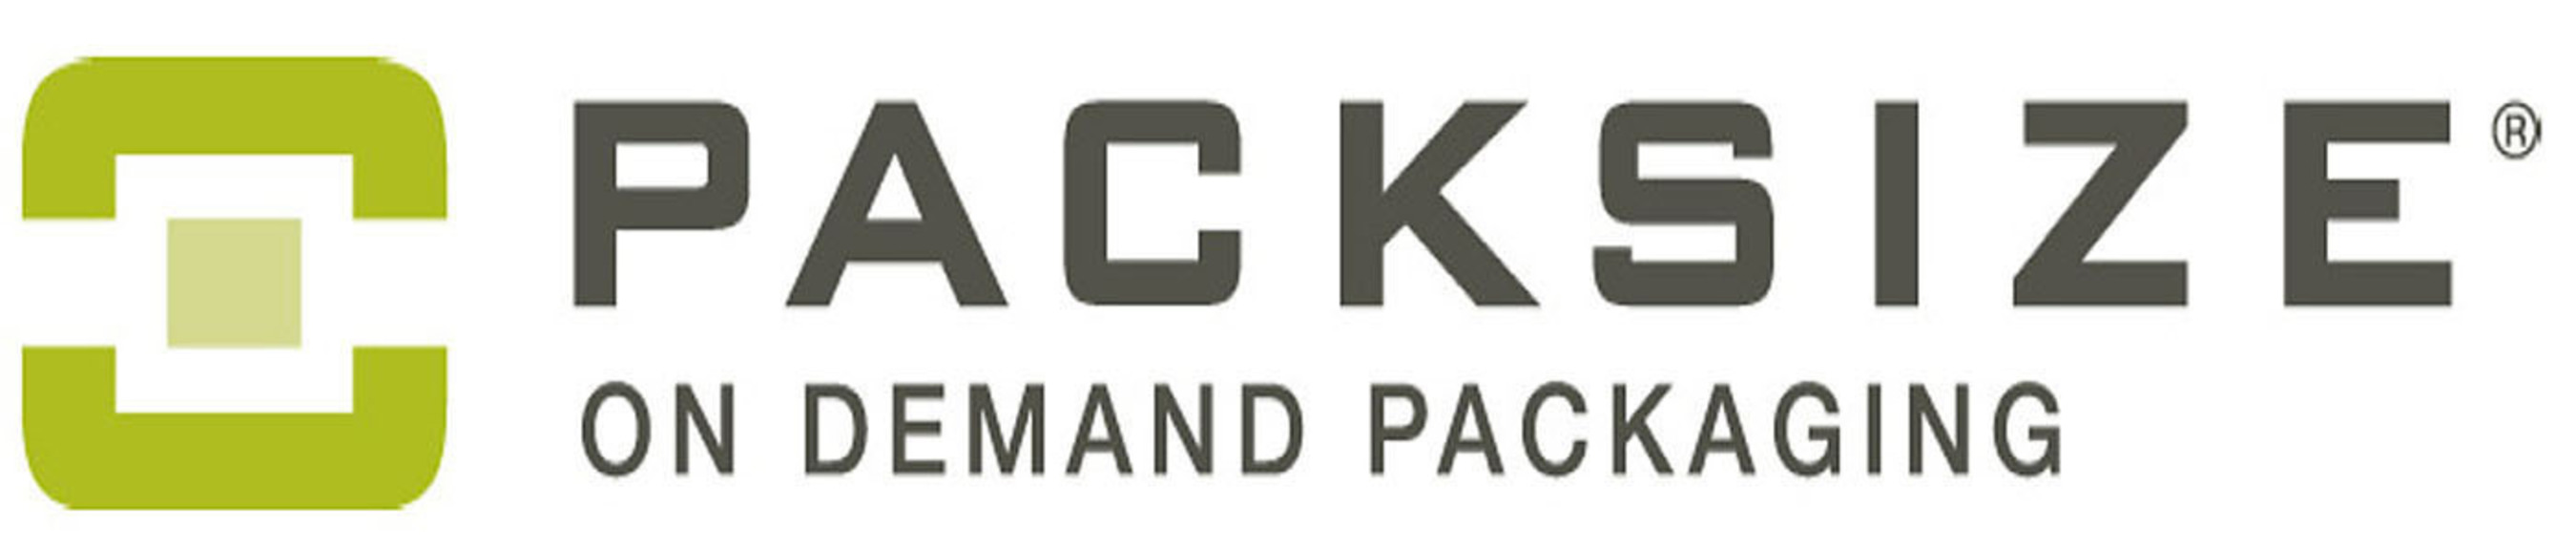 Packsize makes it easy with On Demand Packaging (http://www.packsize.com/on-demand), a revolutionary packaging system that lets companies produce the right-sized box exactly when they need it.